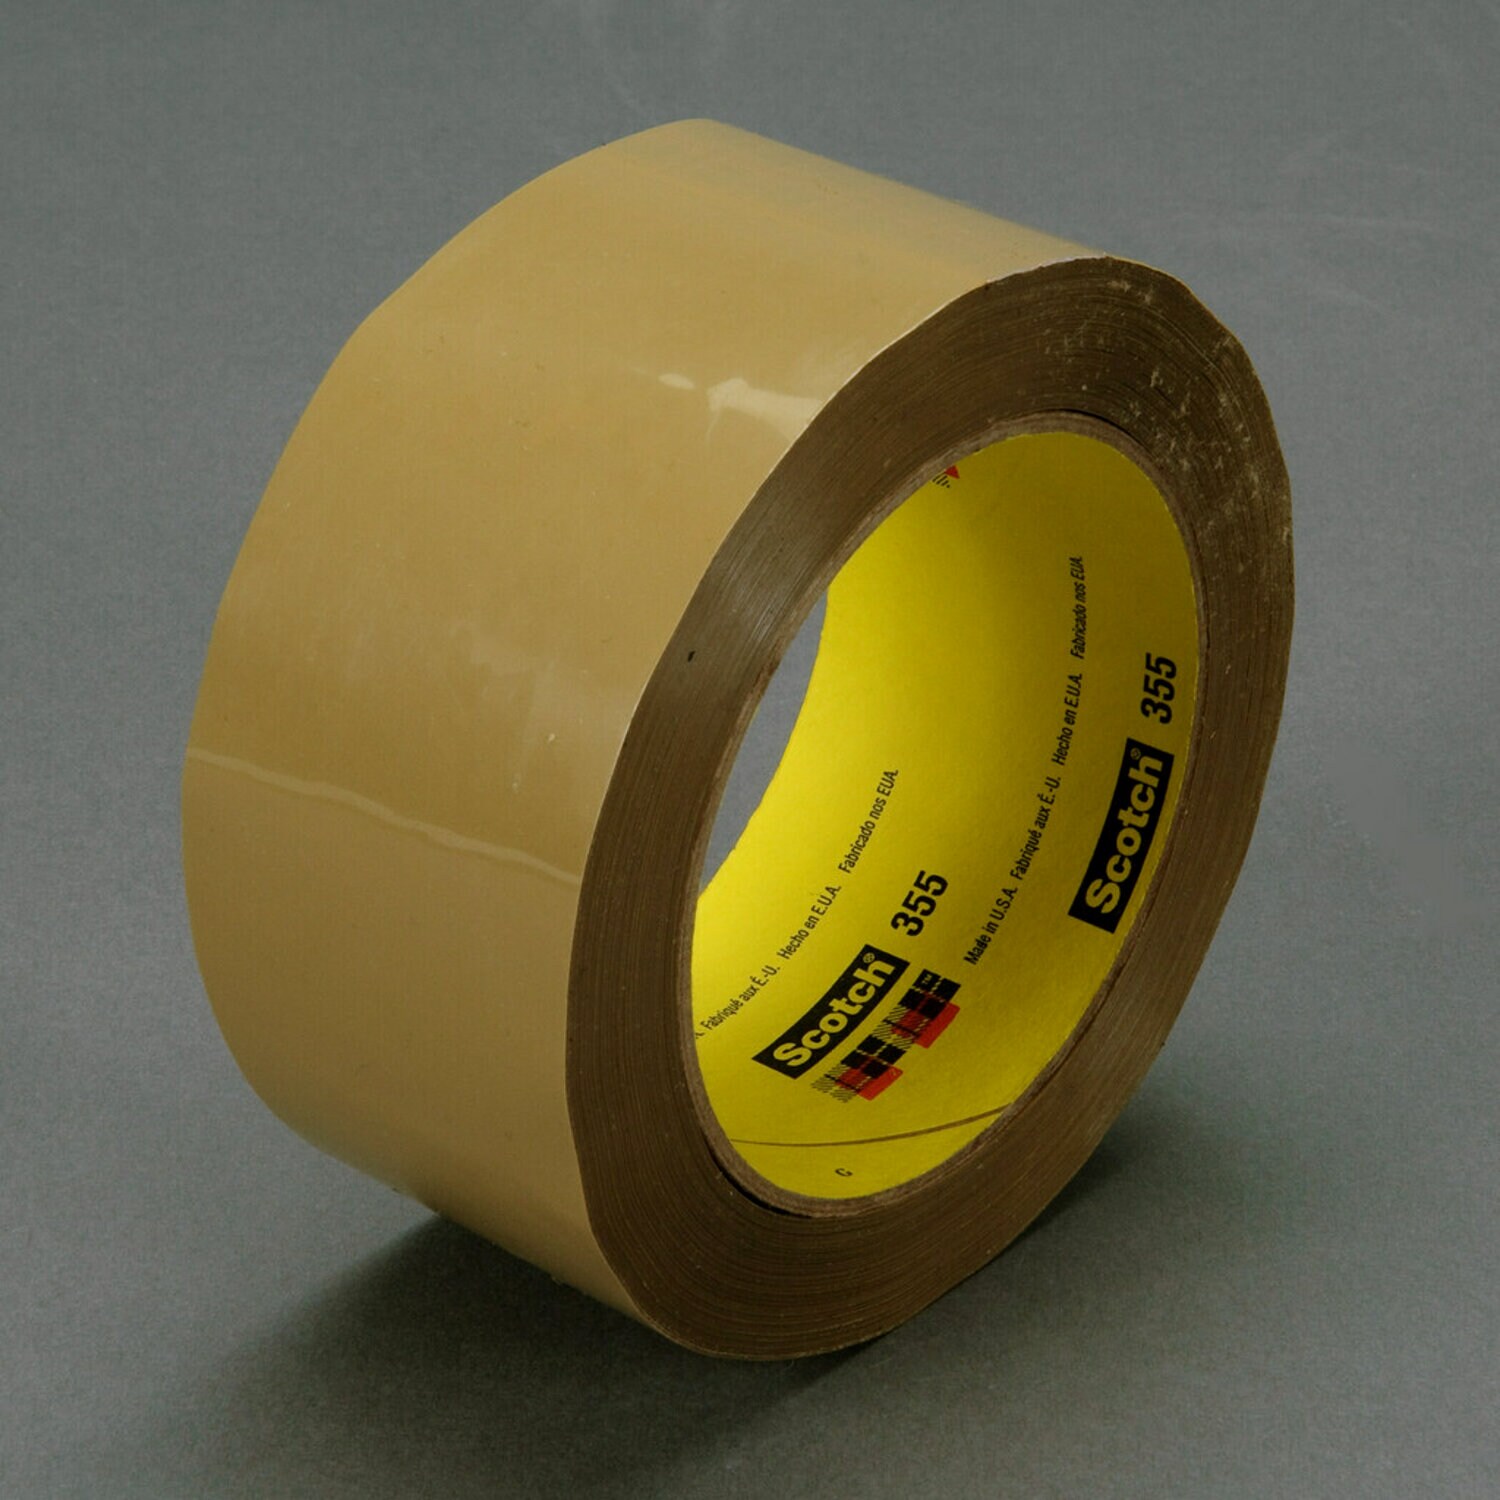 Scotch-Mount Indoor Double-Sided Mounting Tape 110H-MR, 3/4 in x 38 yd (1.9 cm x 34.75 M)